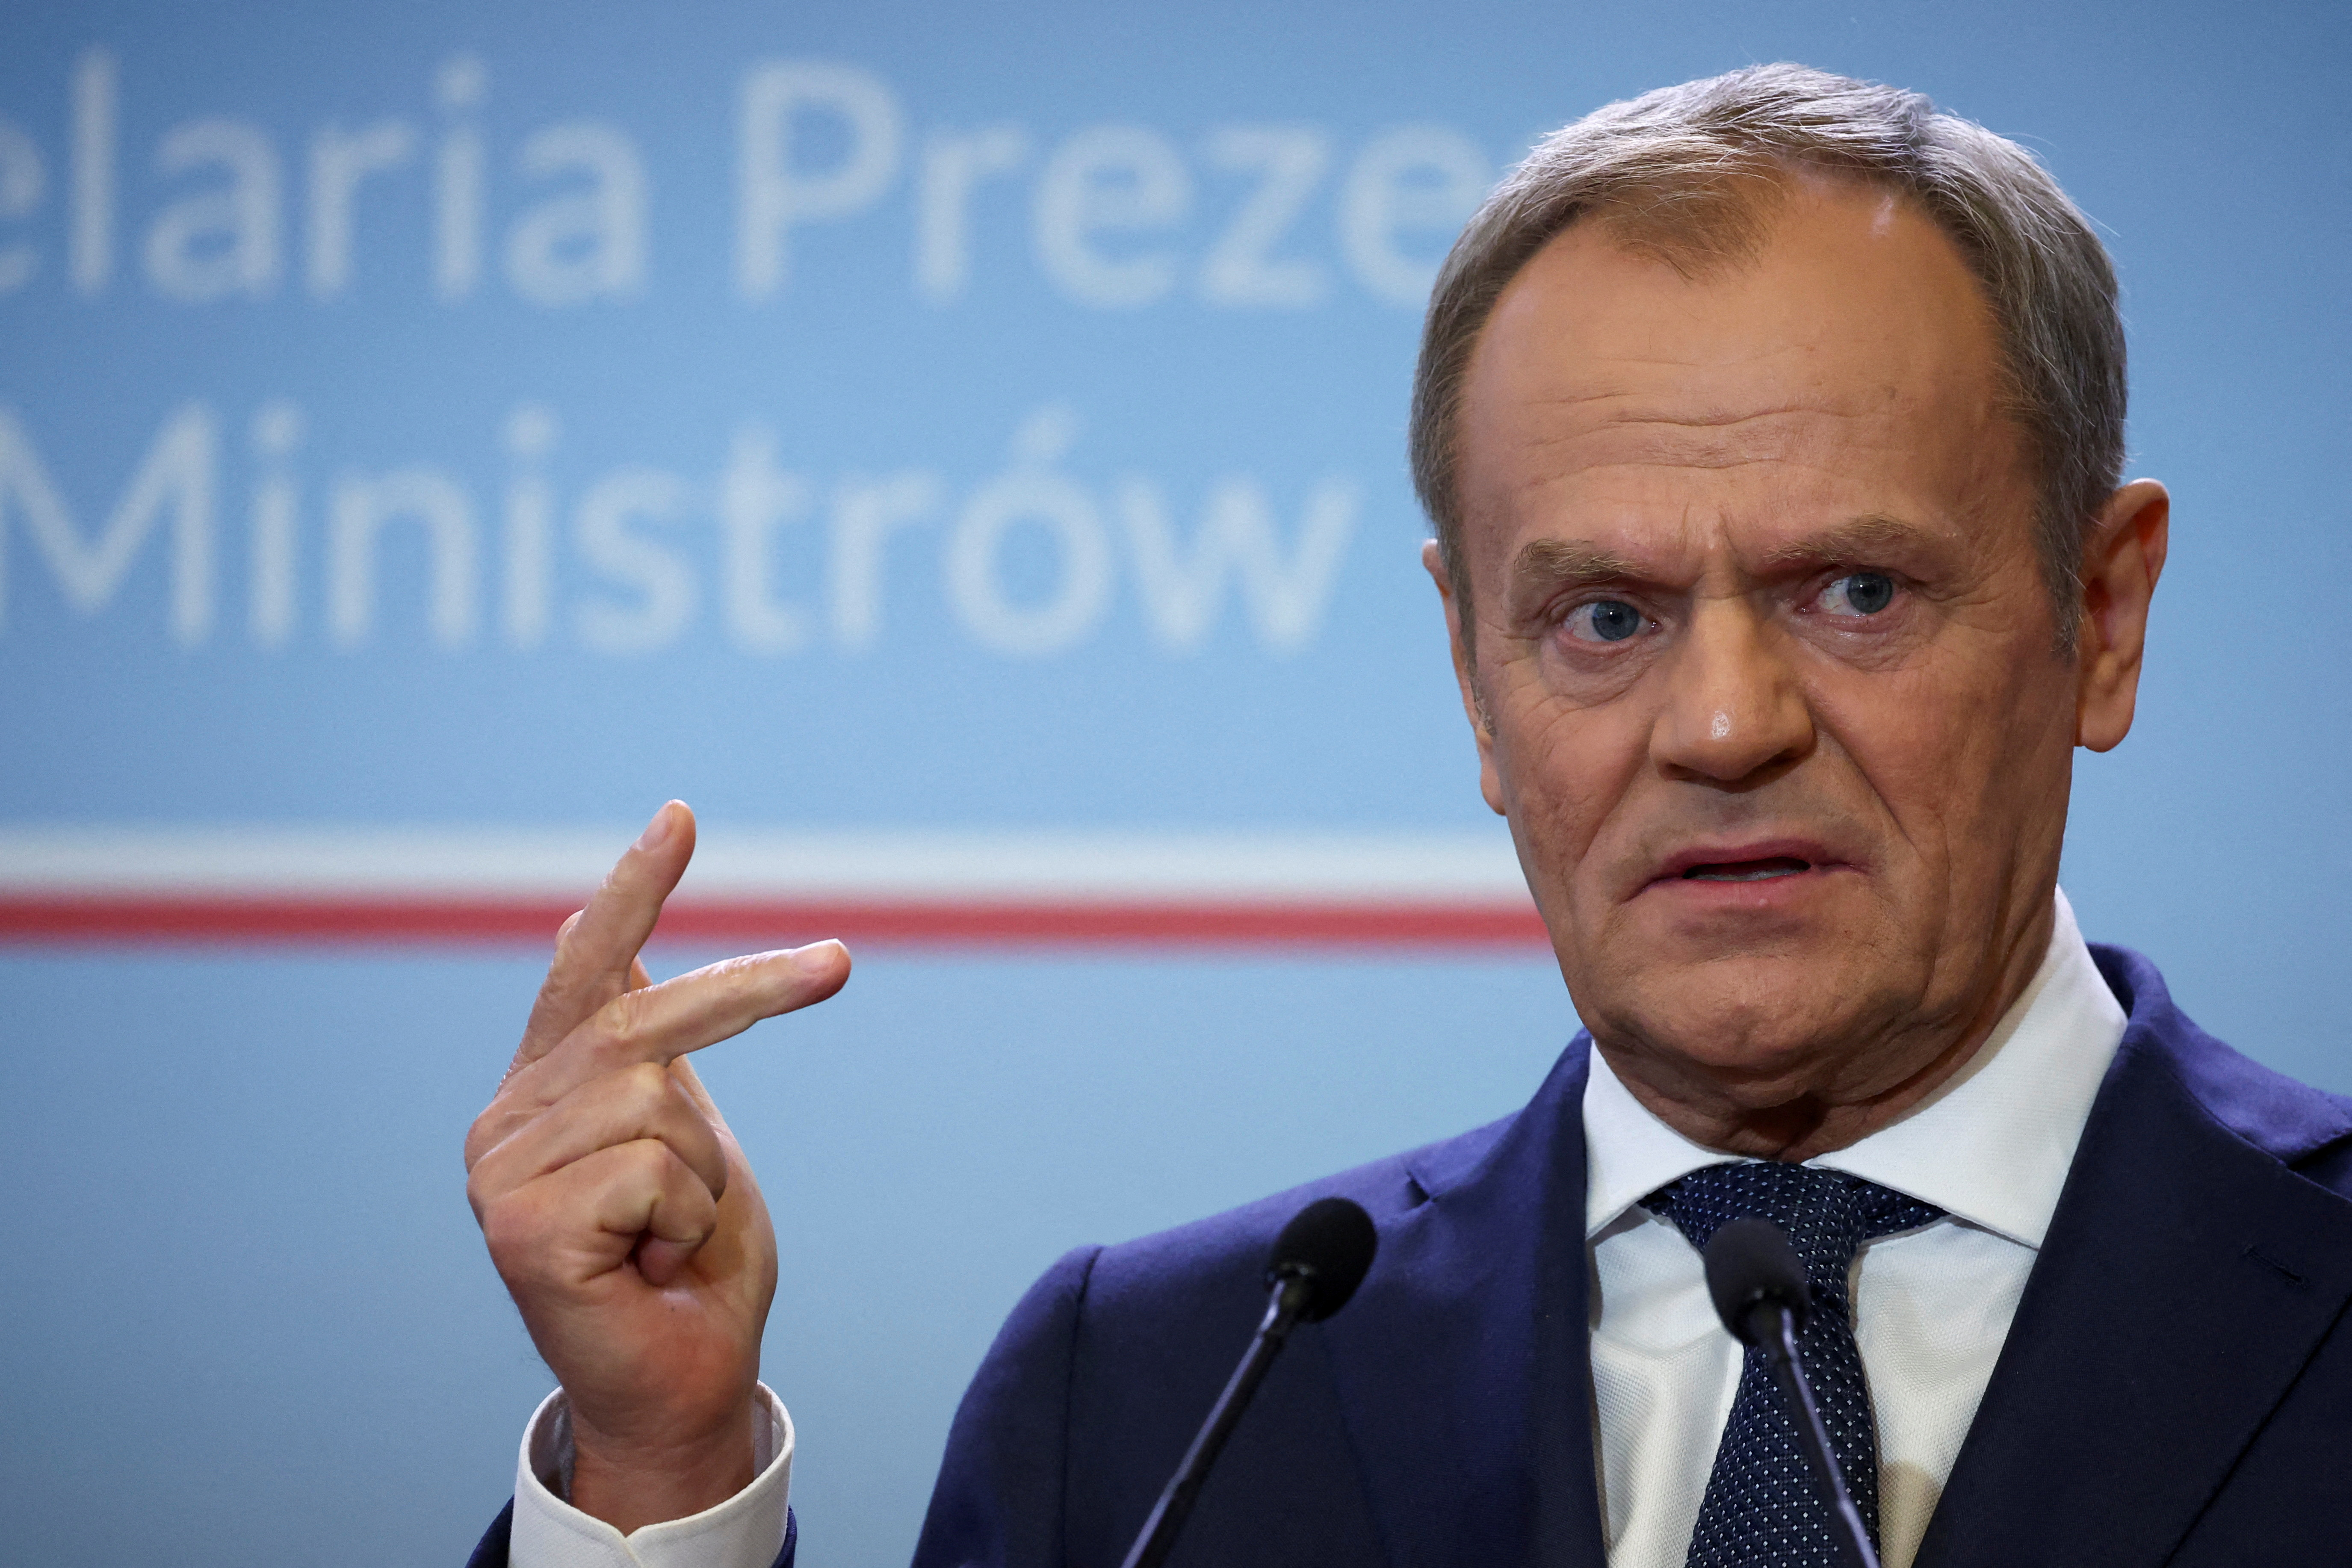 Danish Prime Minister Frederiksen meets with Polish Prime Minister Tusk in Warsaw